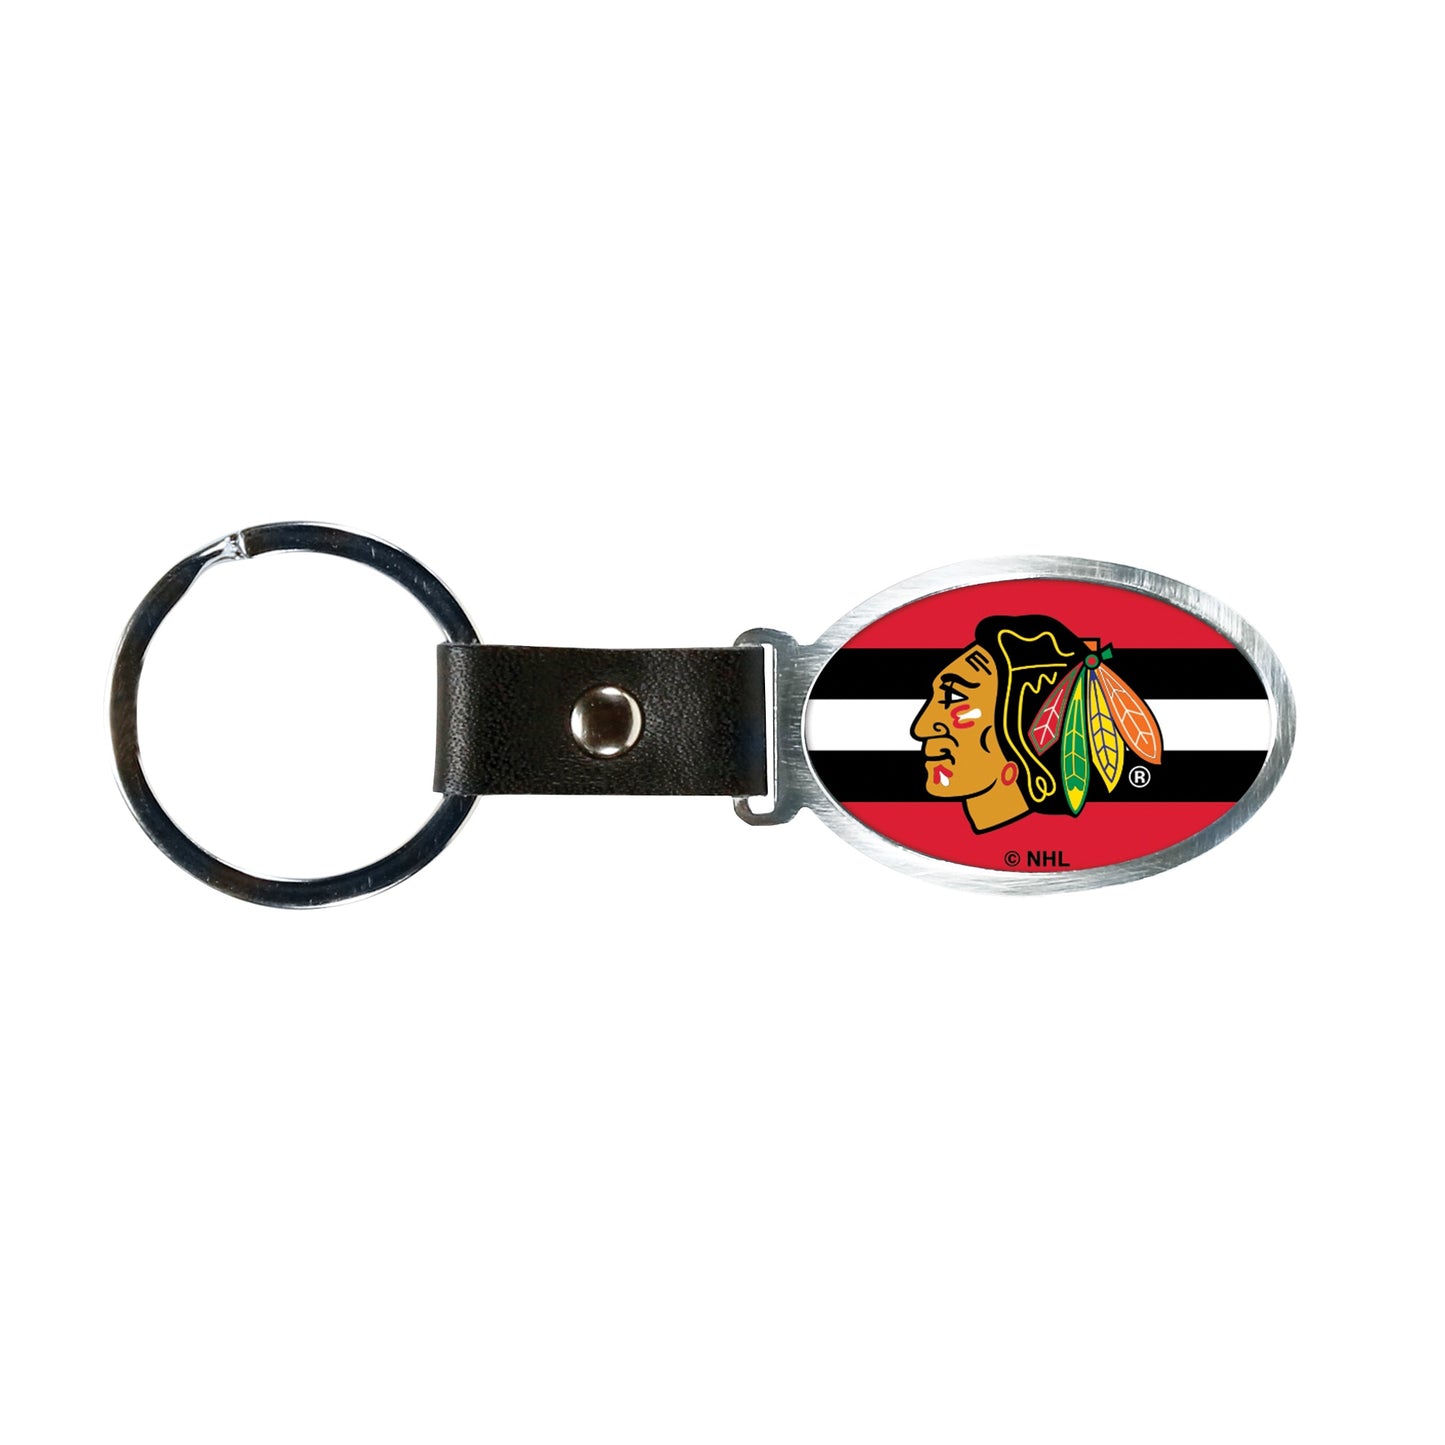 NHL Chicago Blackhawks Accent Key Ring by Rico Industries